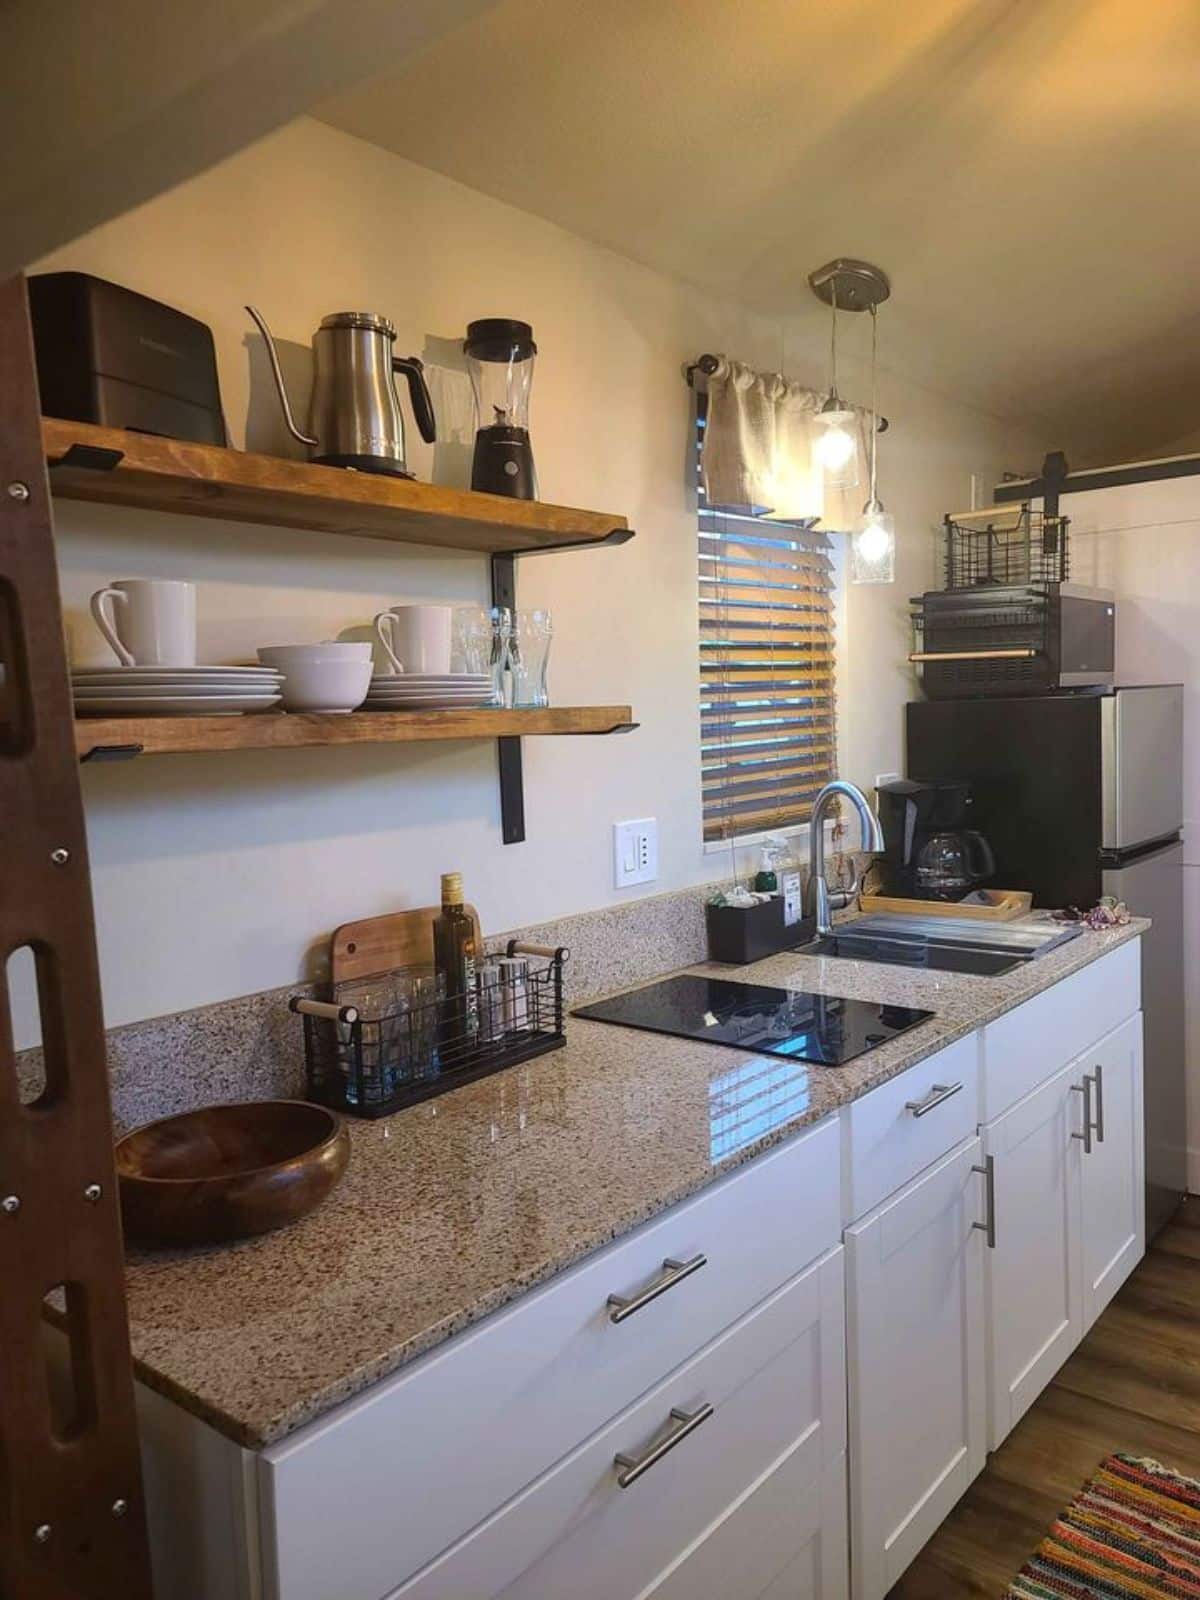 kitchen area of tiny house with deck is compact yet stylish